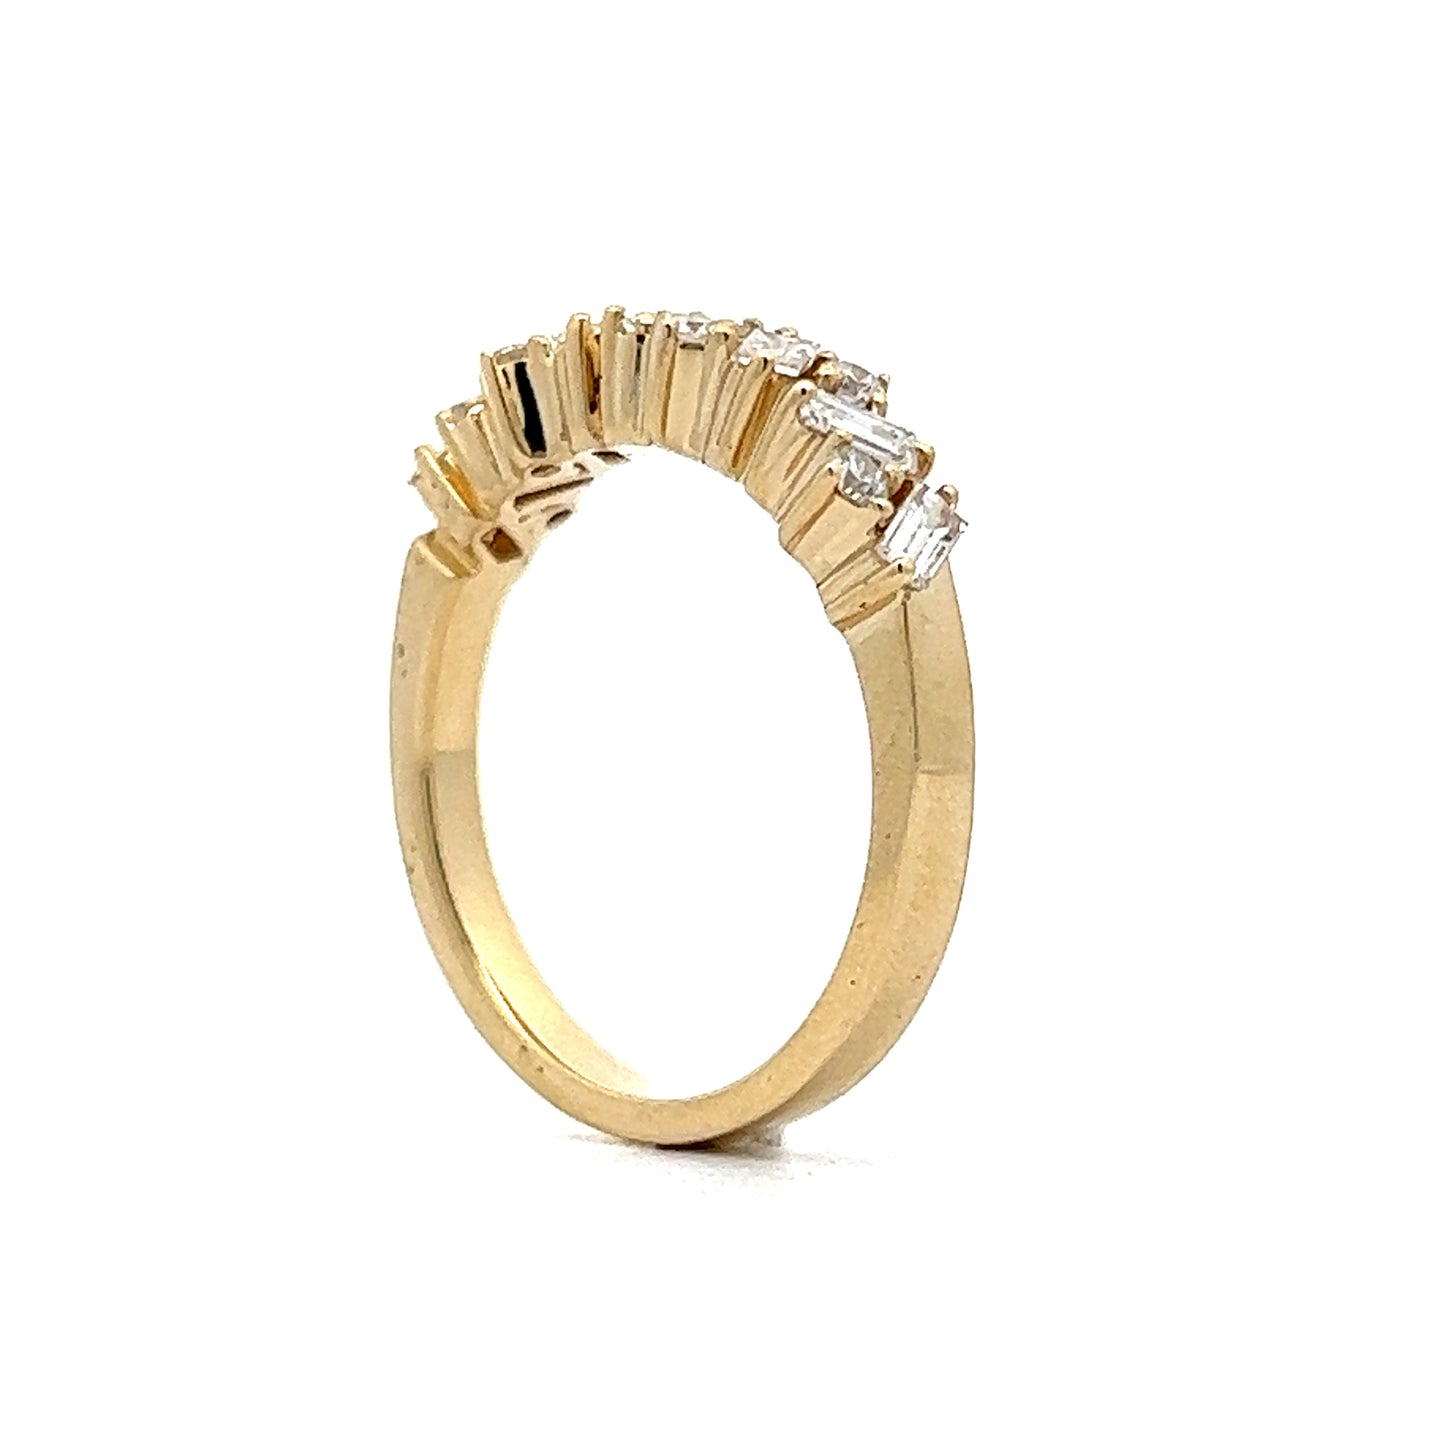 .42 Diamond Cluster Stacking Wedding Band in 14K Yellow Gold